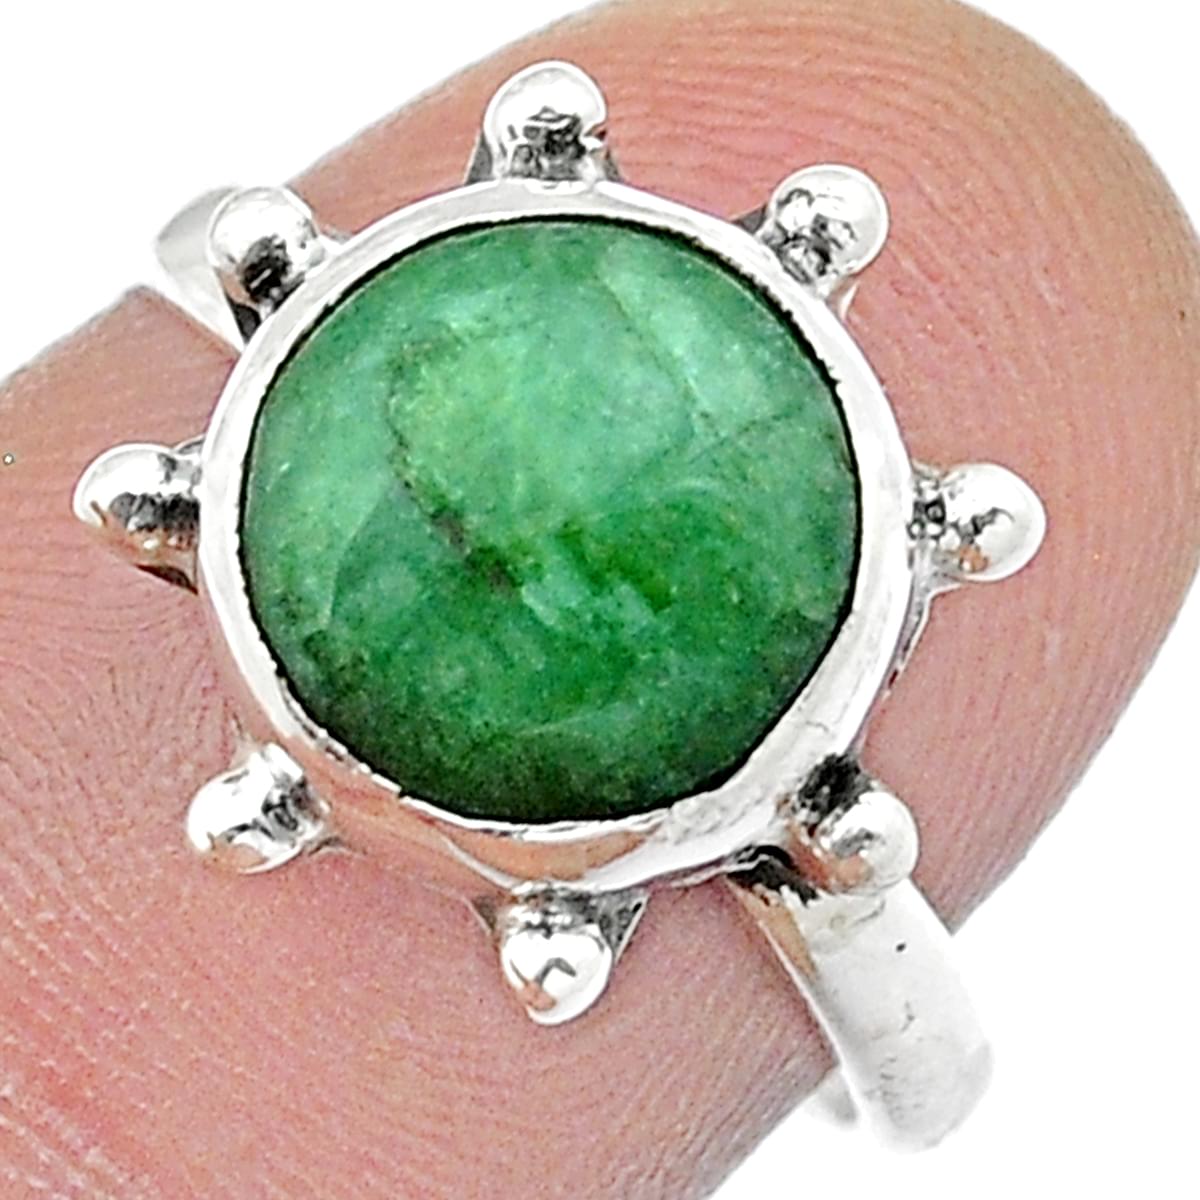 WHOLESALE 5PC 925 SILVER PLATED FACETED GREEN EMERALD RING LOT N150 